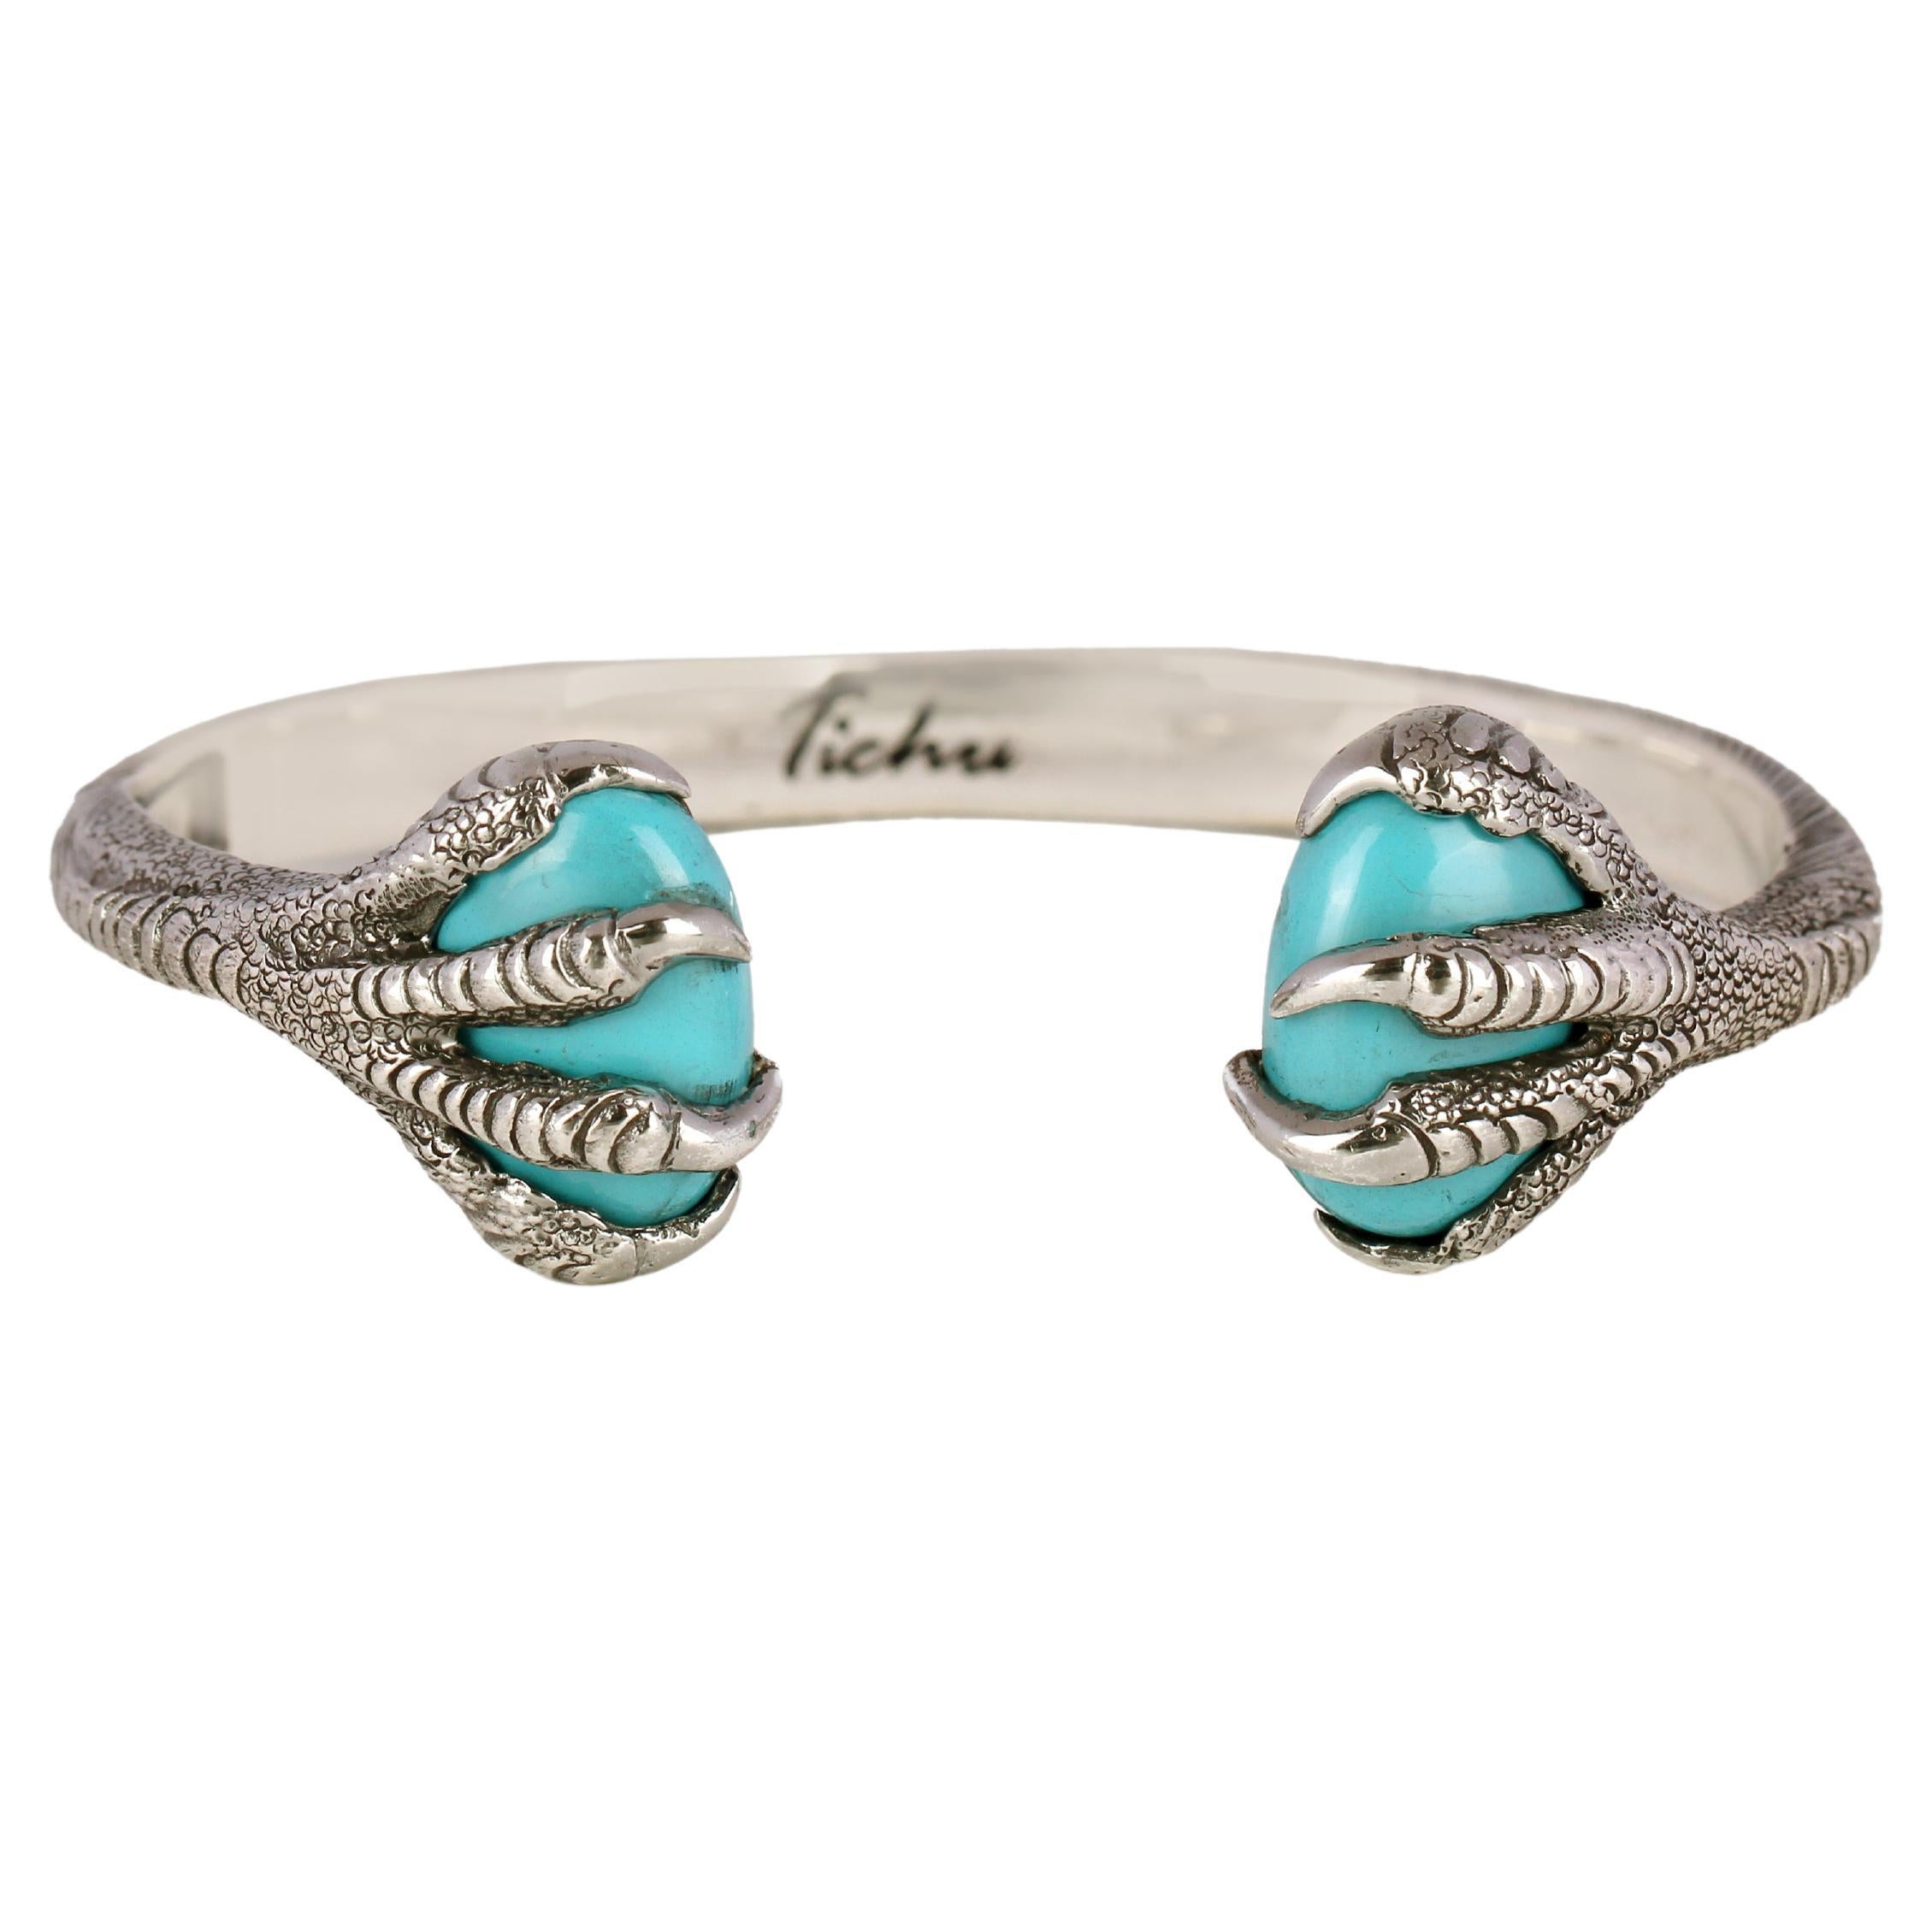 Tichu Turquoise Eagle Claw Cuff in Sterling Sliver and Crystal Quartz 'Size S'